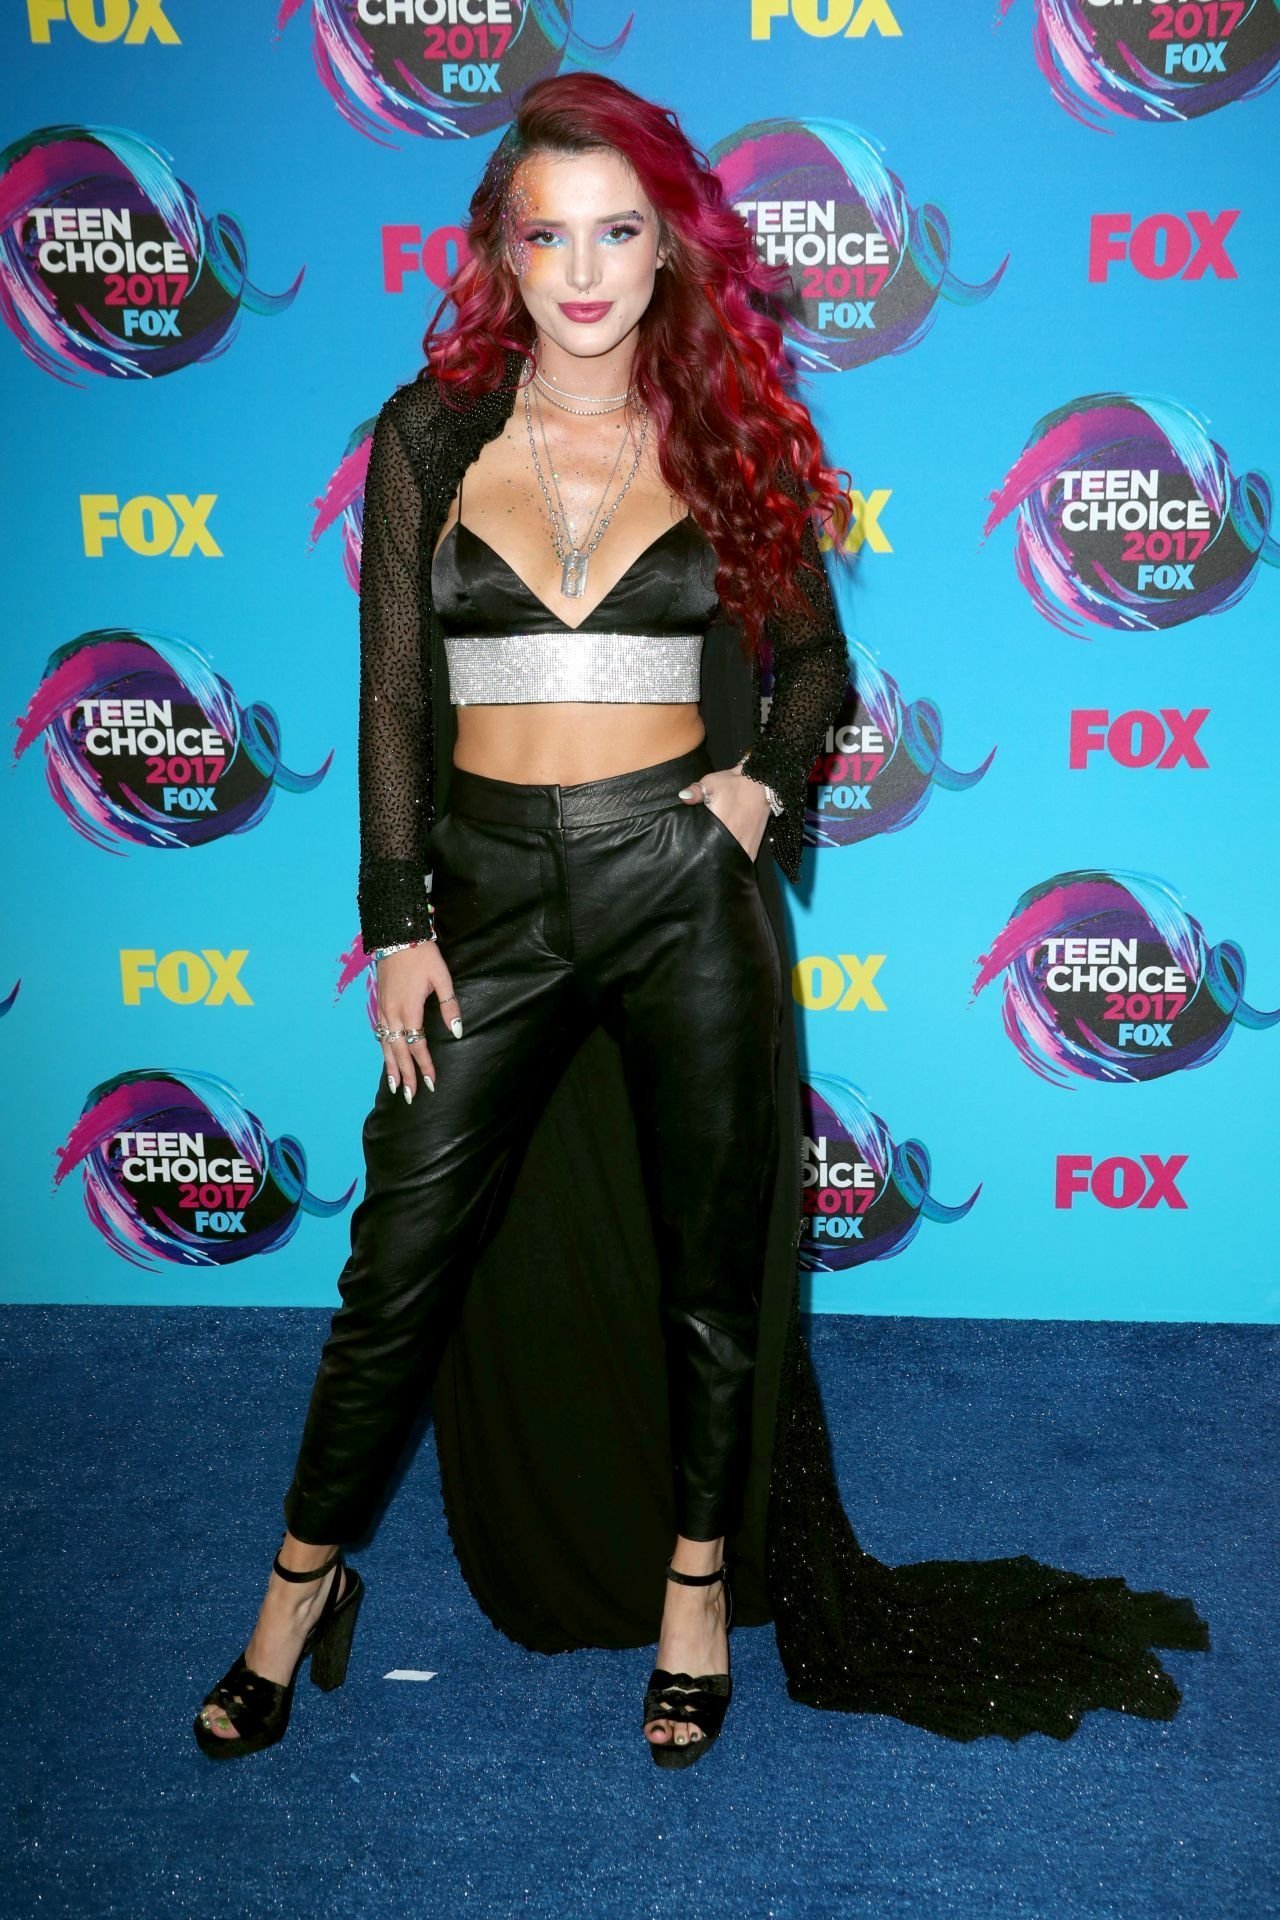 Bella Thorne - Teen Choice 2017 Awards in Los Angeles | Picture 1522979